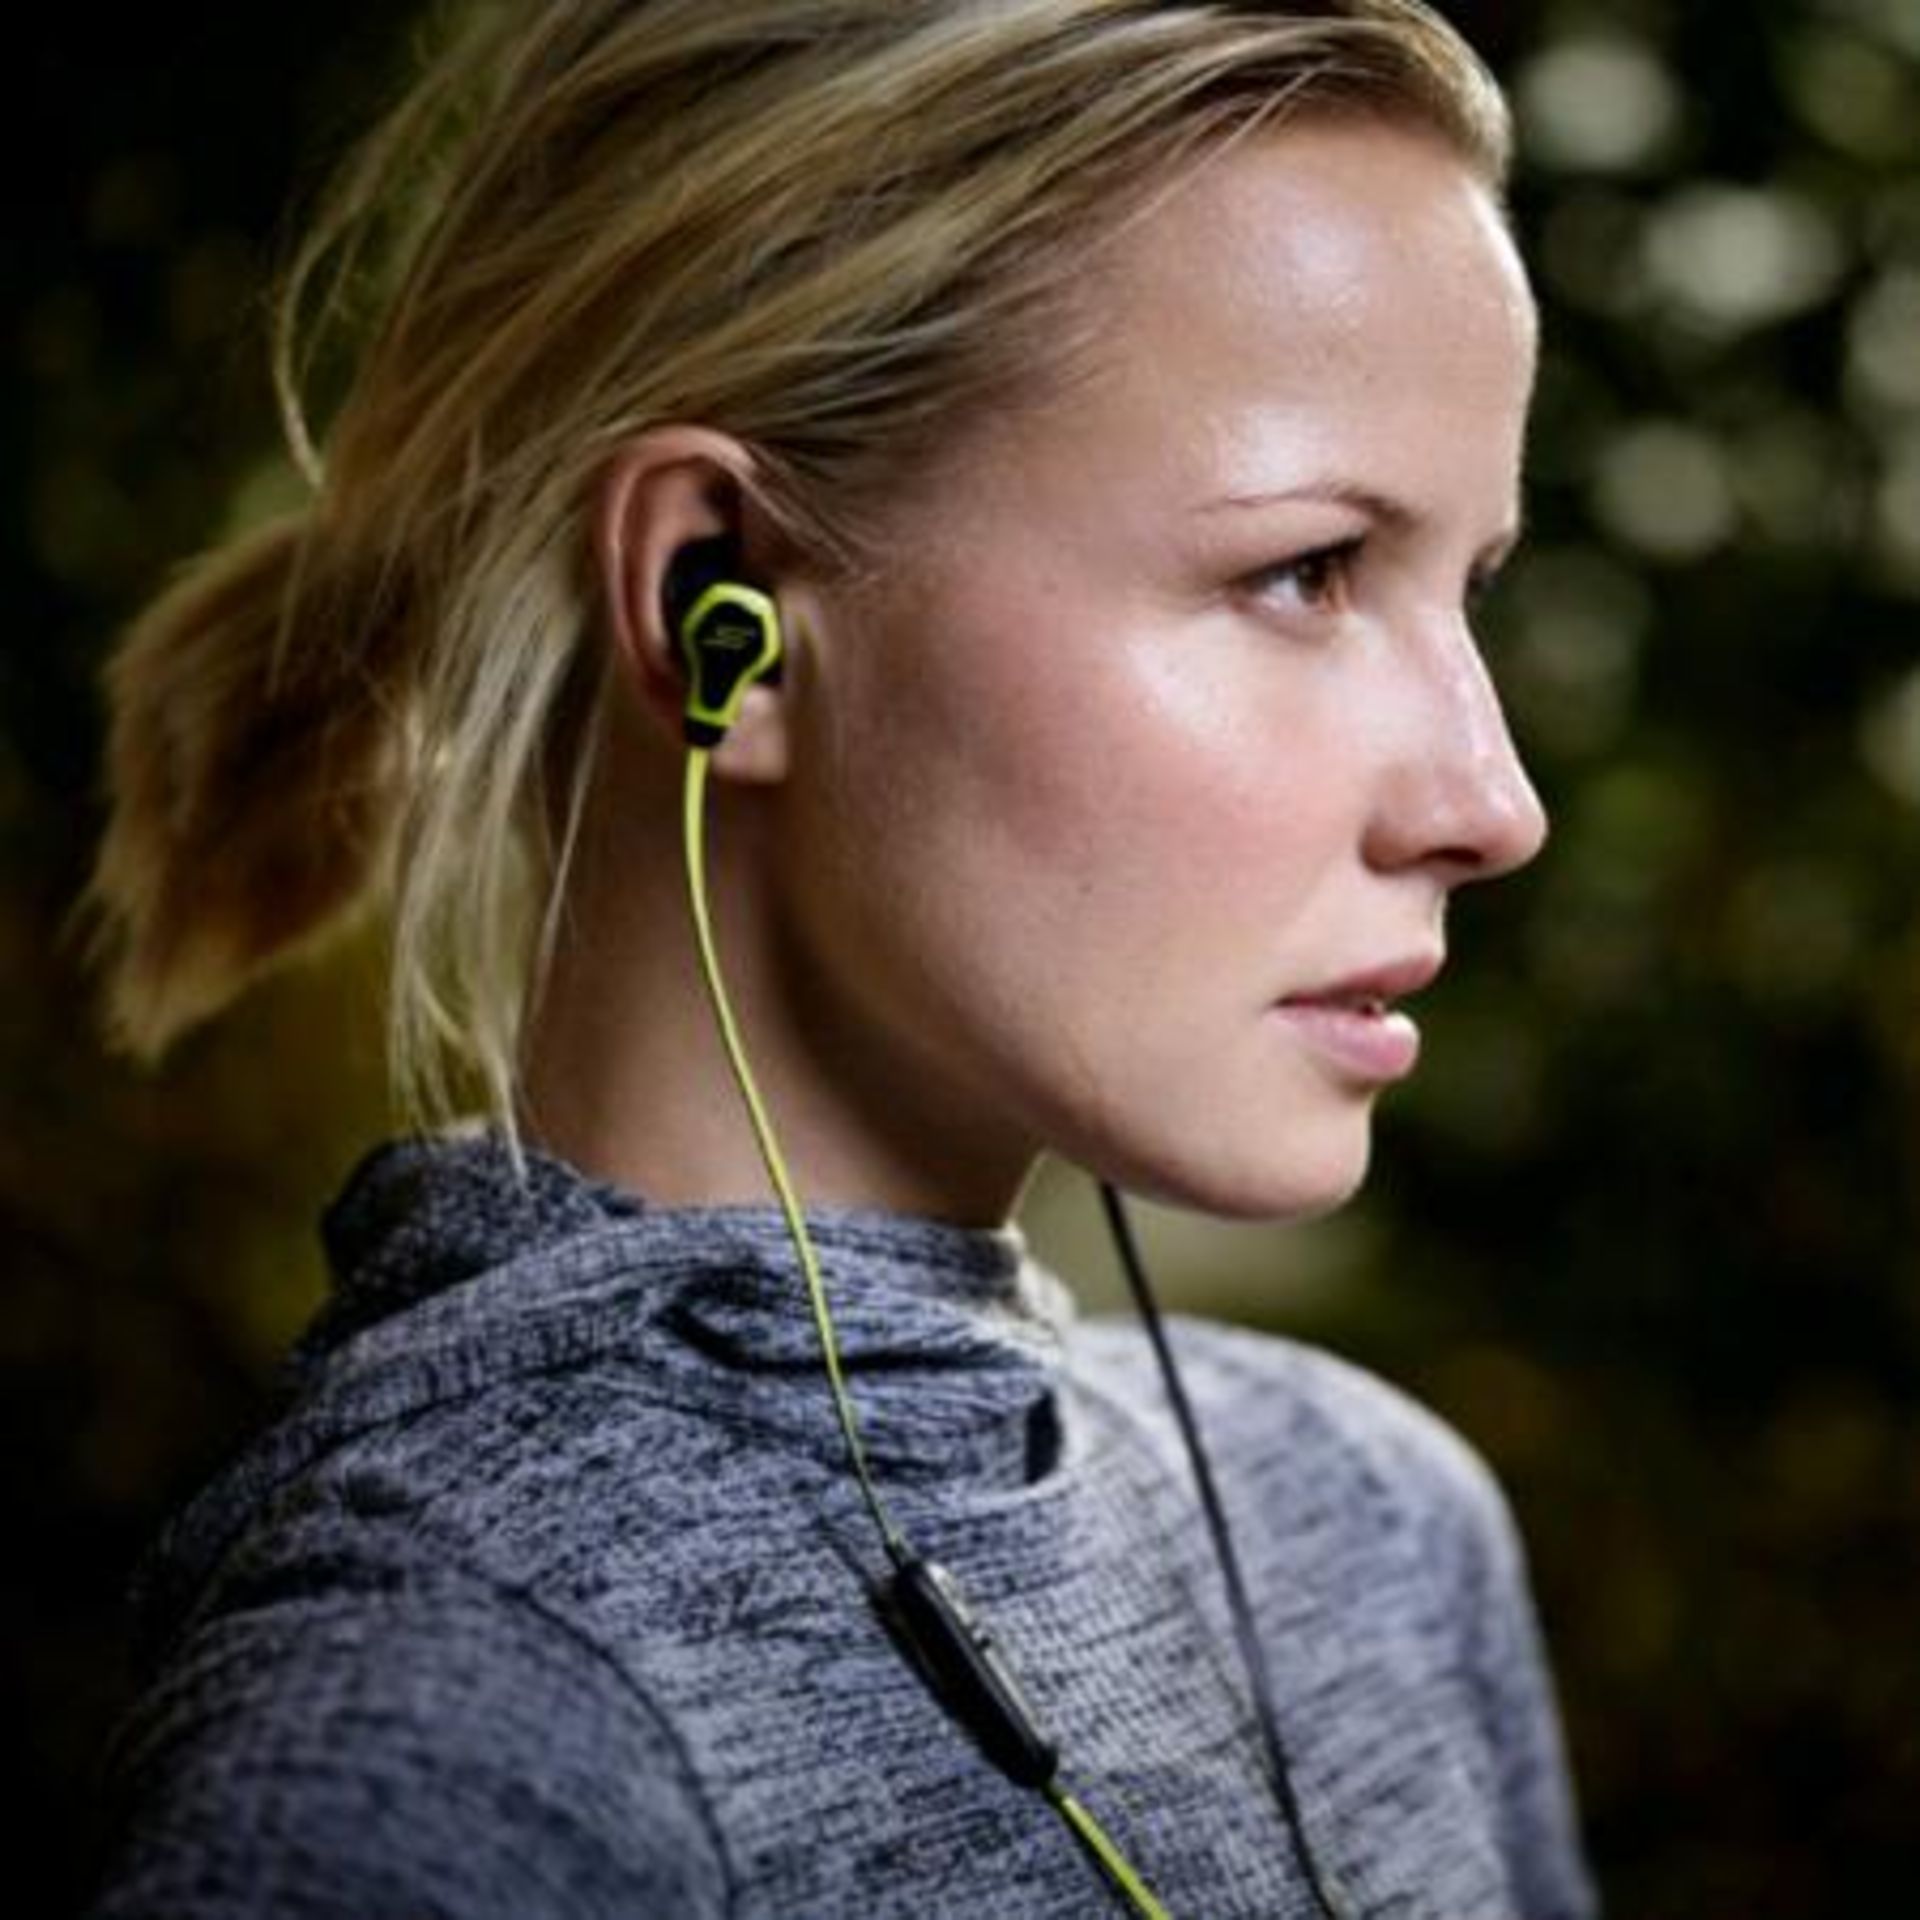 V Brand New SMS Audio BioSport Earphones - Heart Rate Monitor Measures Changes In Blood Flow - Smart - Image 5 of 5